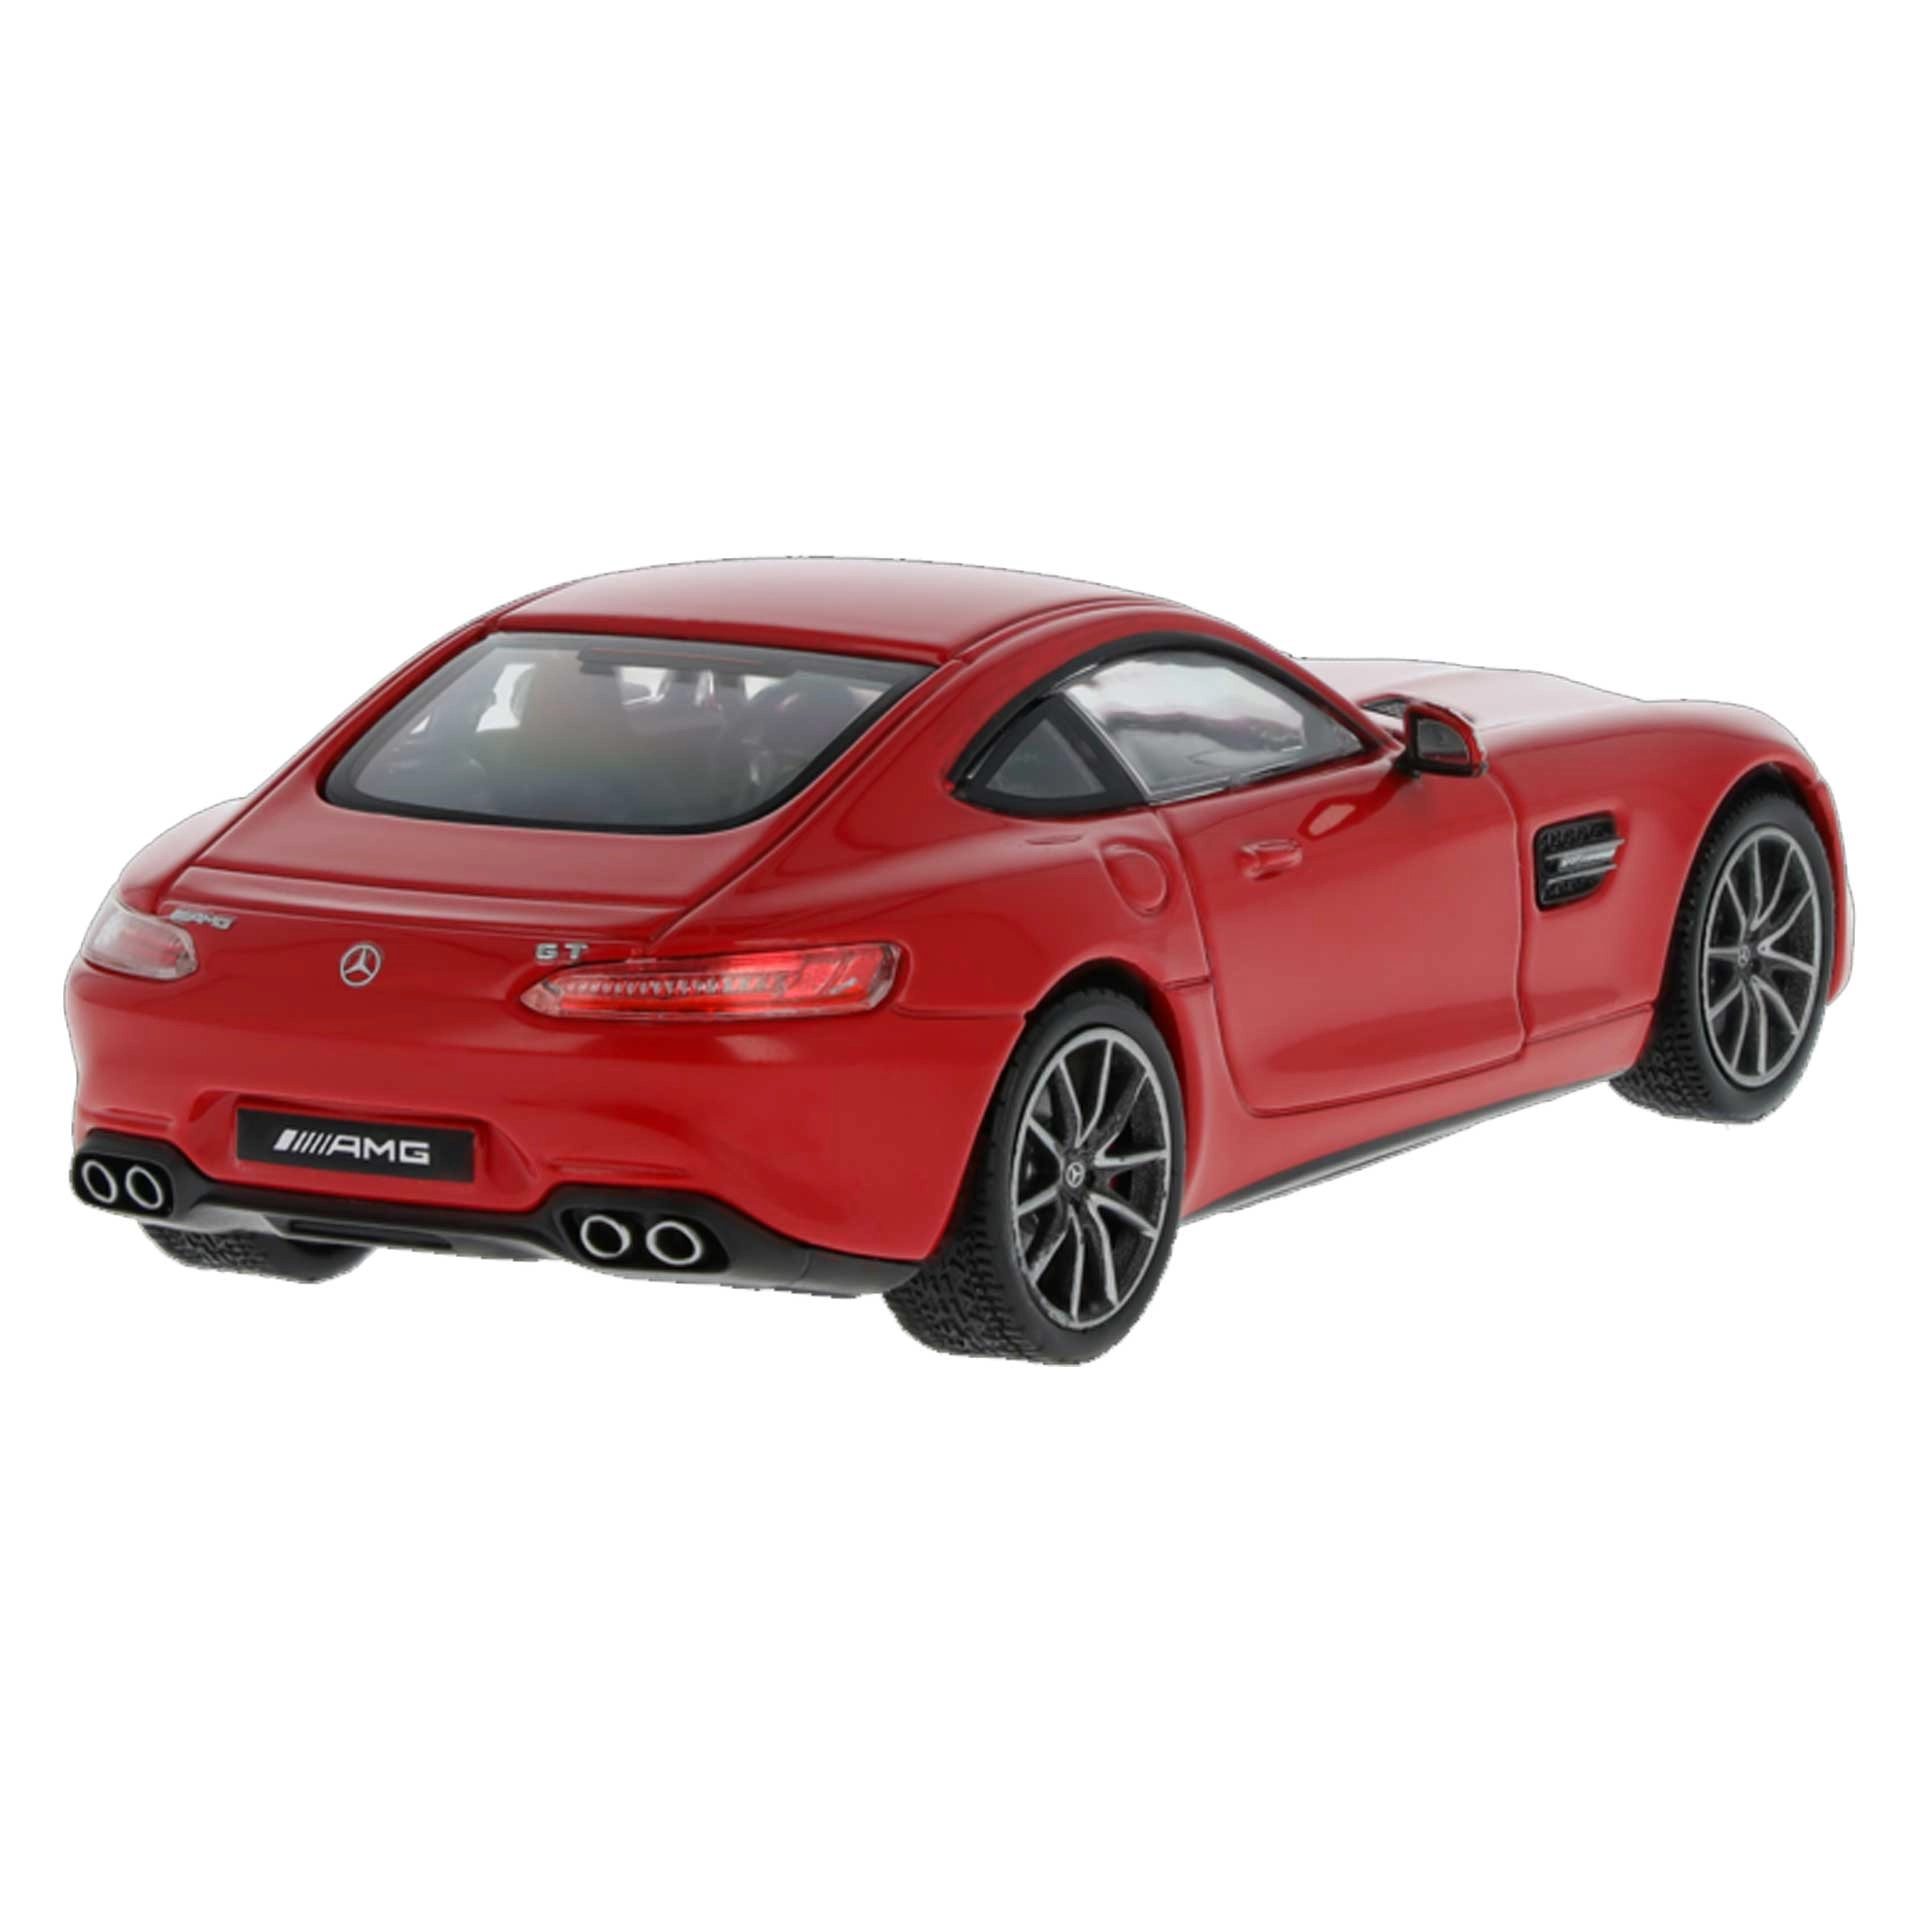 B66960483_mercedes-amg-gt-r_coupe_c190_modellauto_rosier-onlineshop2